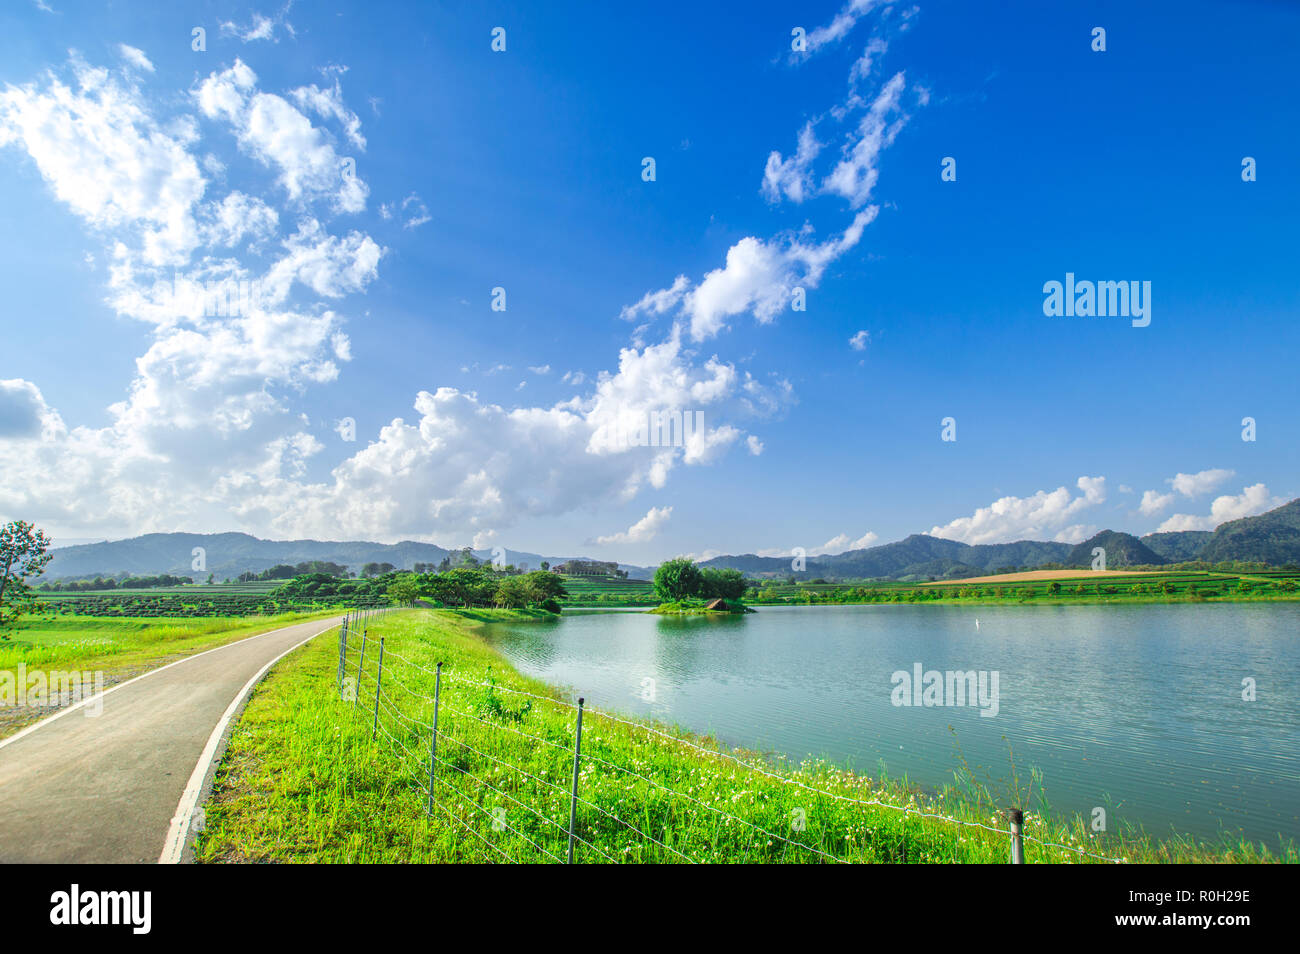 Asphalt road, route in beautiful nature landscape with marsh, blue sky and green grass. Stock Photo